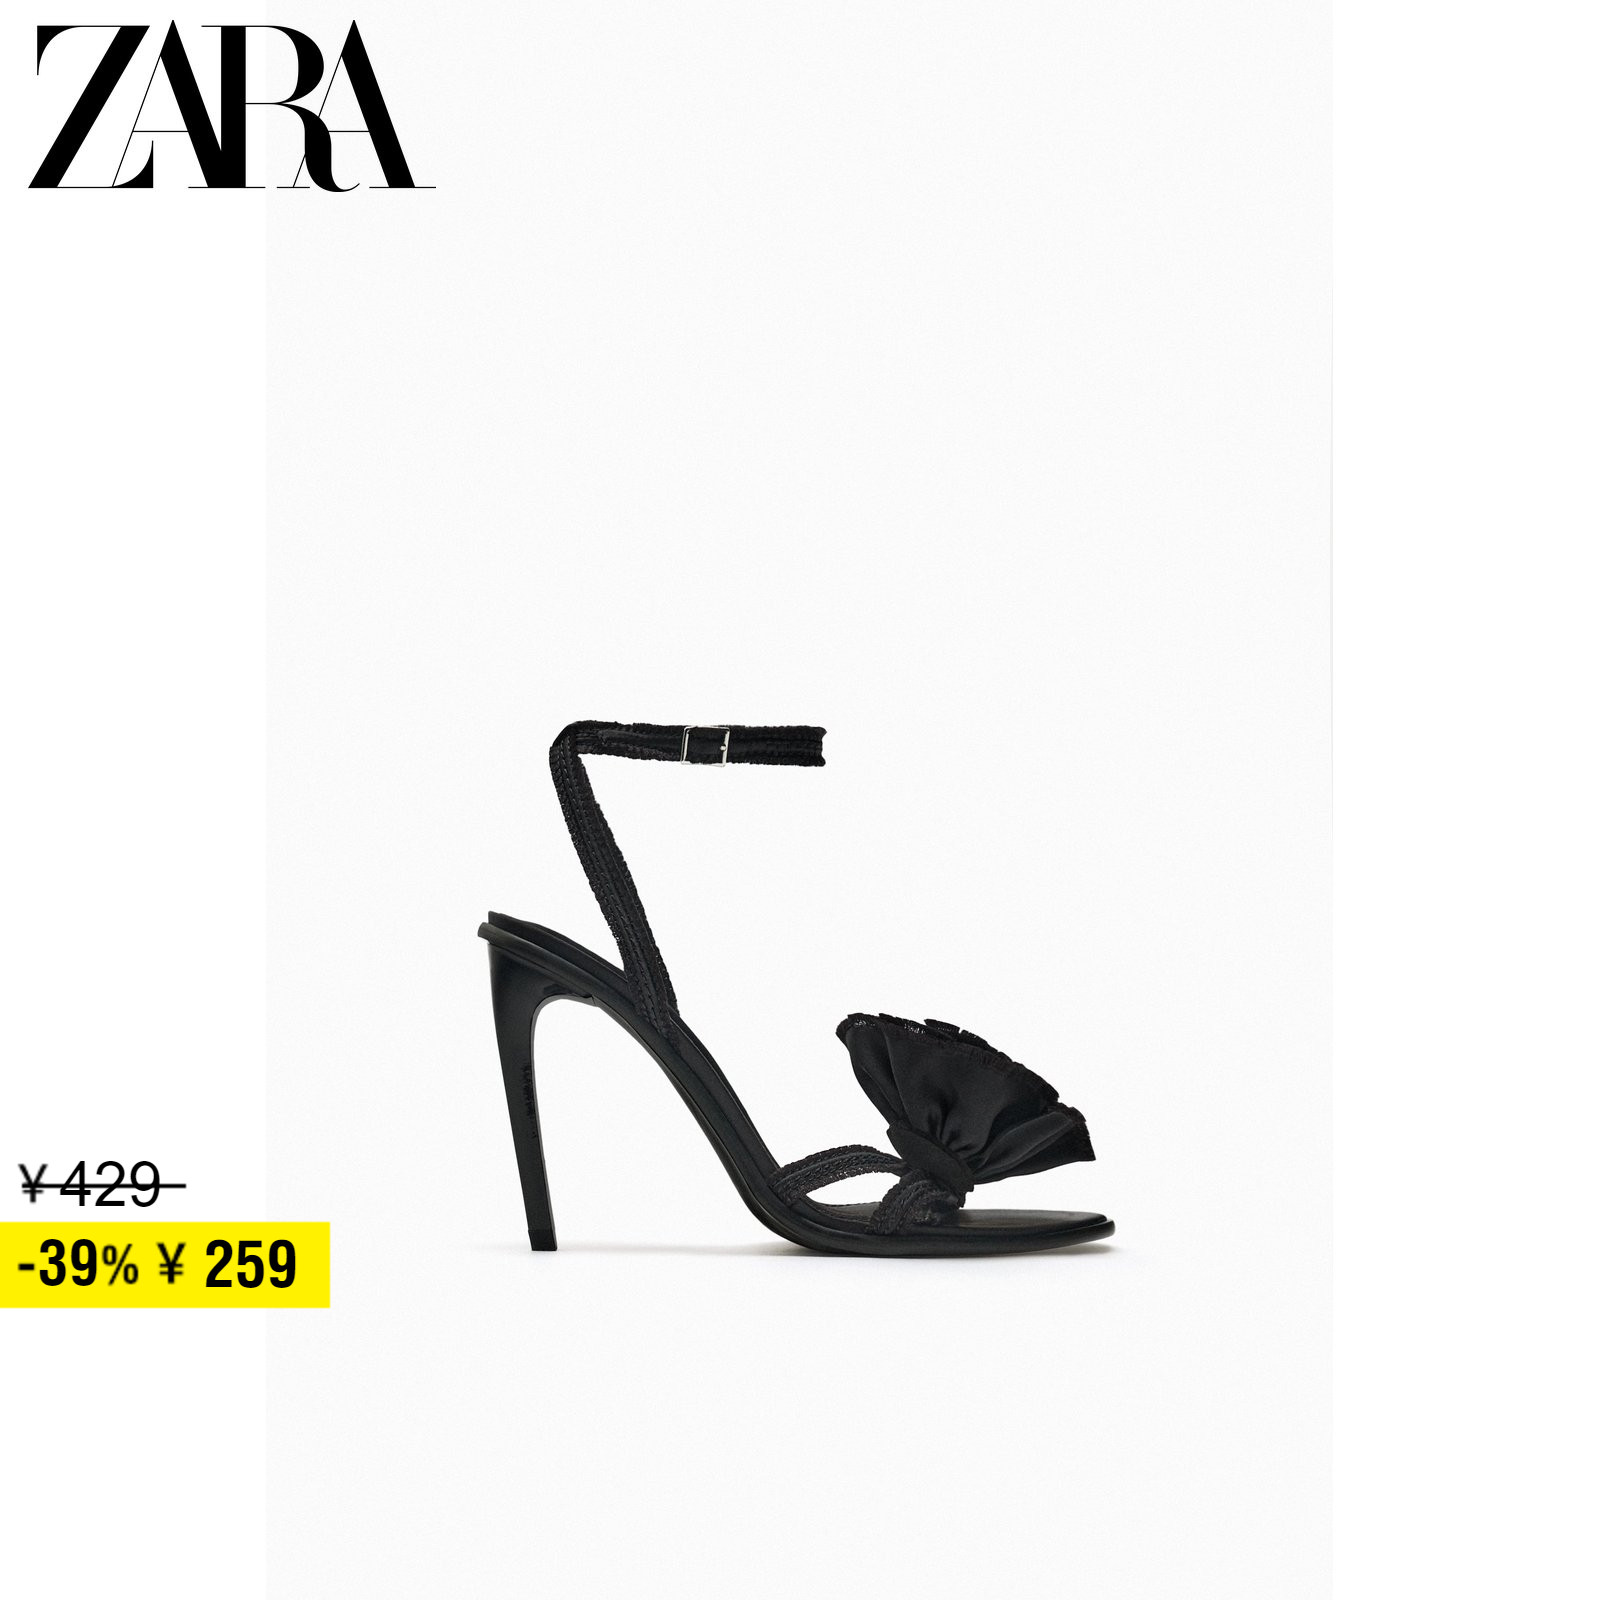 ZARA discount season TRF women's shoes black flowers decorated with high heel sandals 3389210800-Taobao